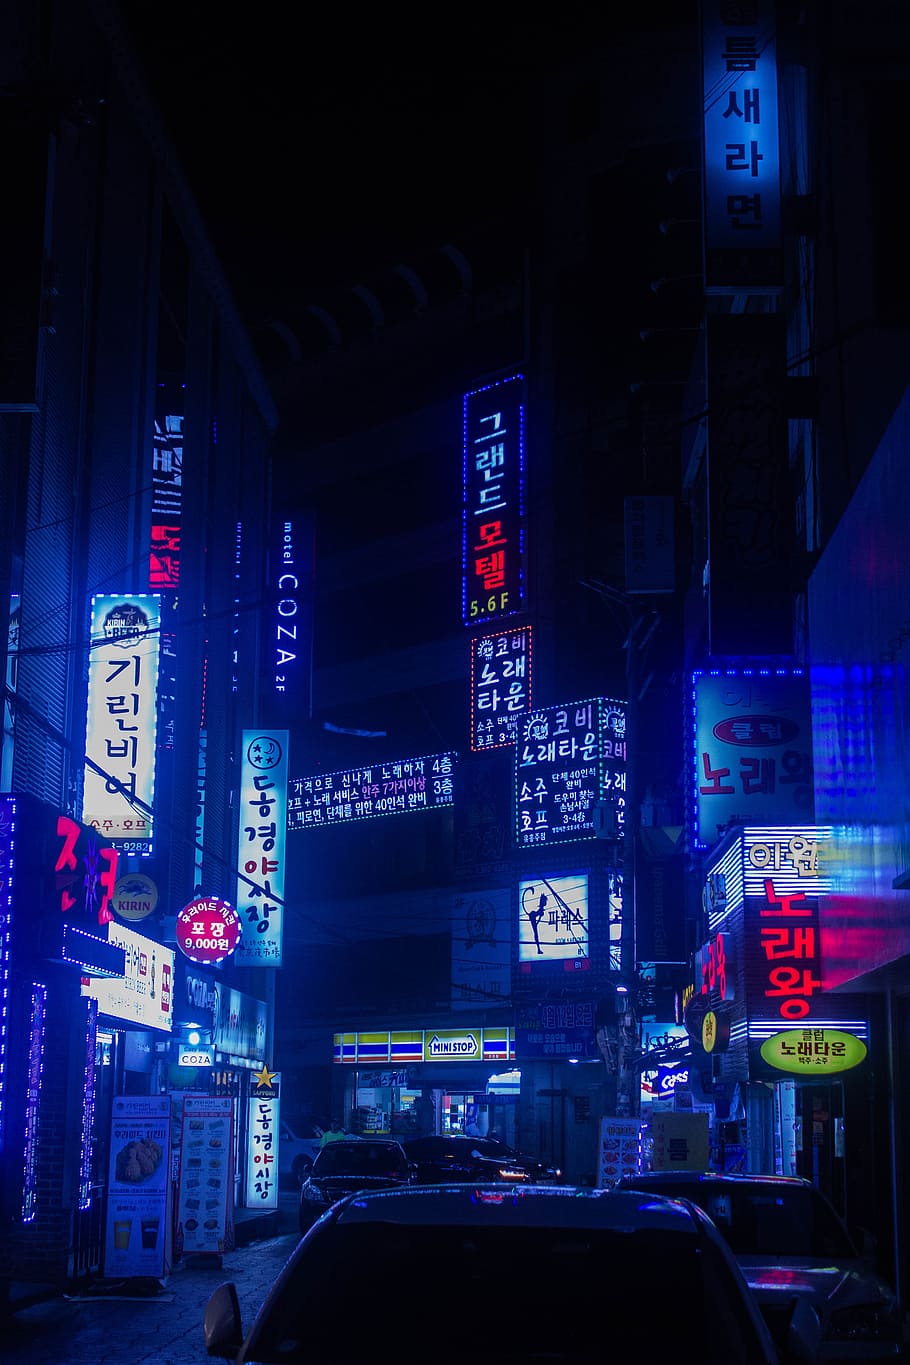 HD Wallpaper: Building Signage Turned On During Nighttime, Korea